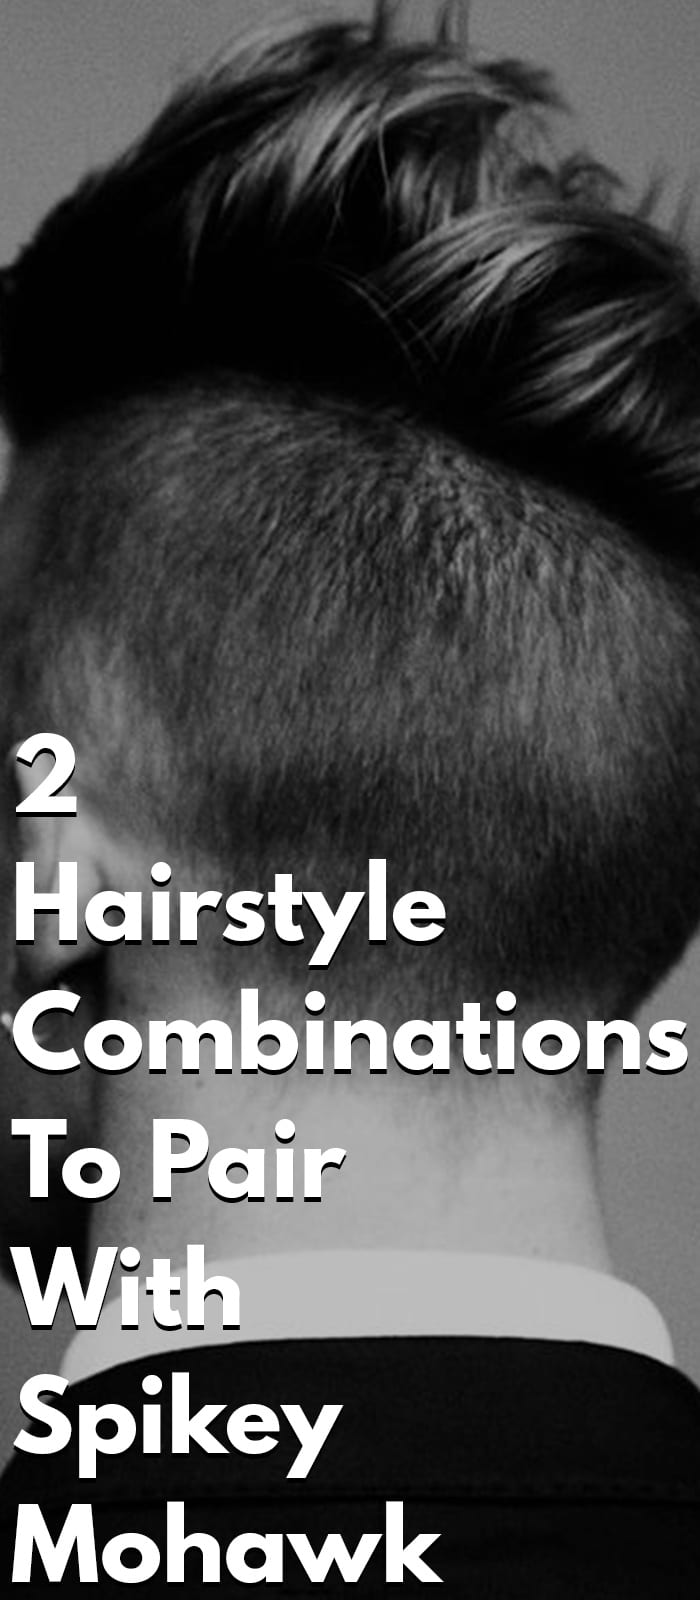 2 Hairstyle Combinations To Pair With Spikey Mohawk